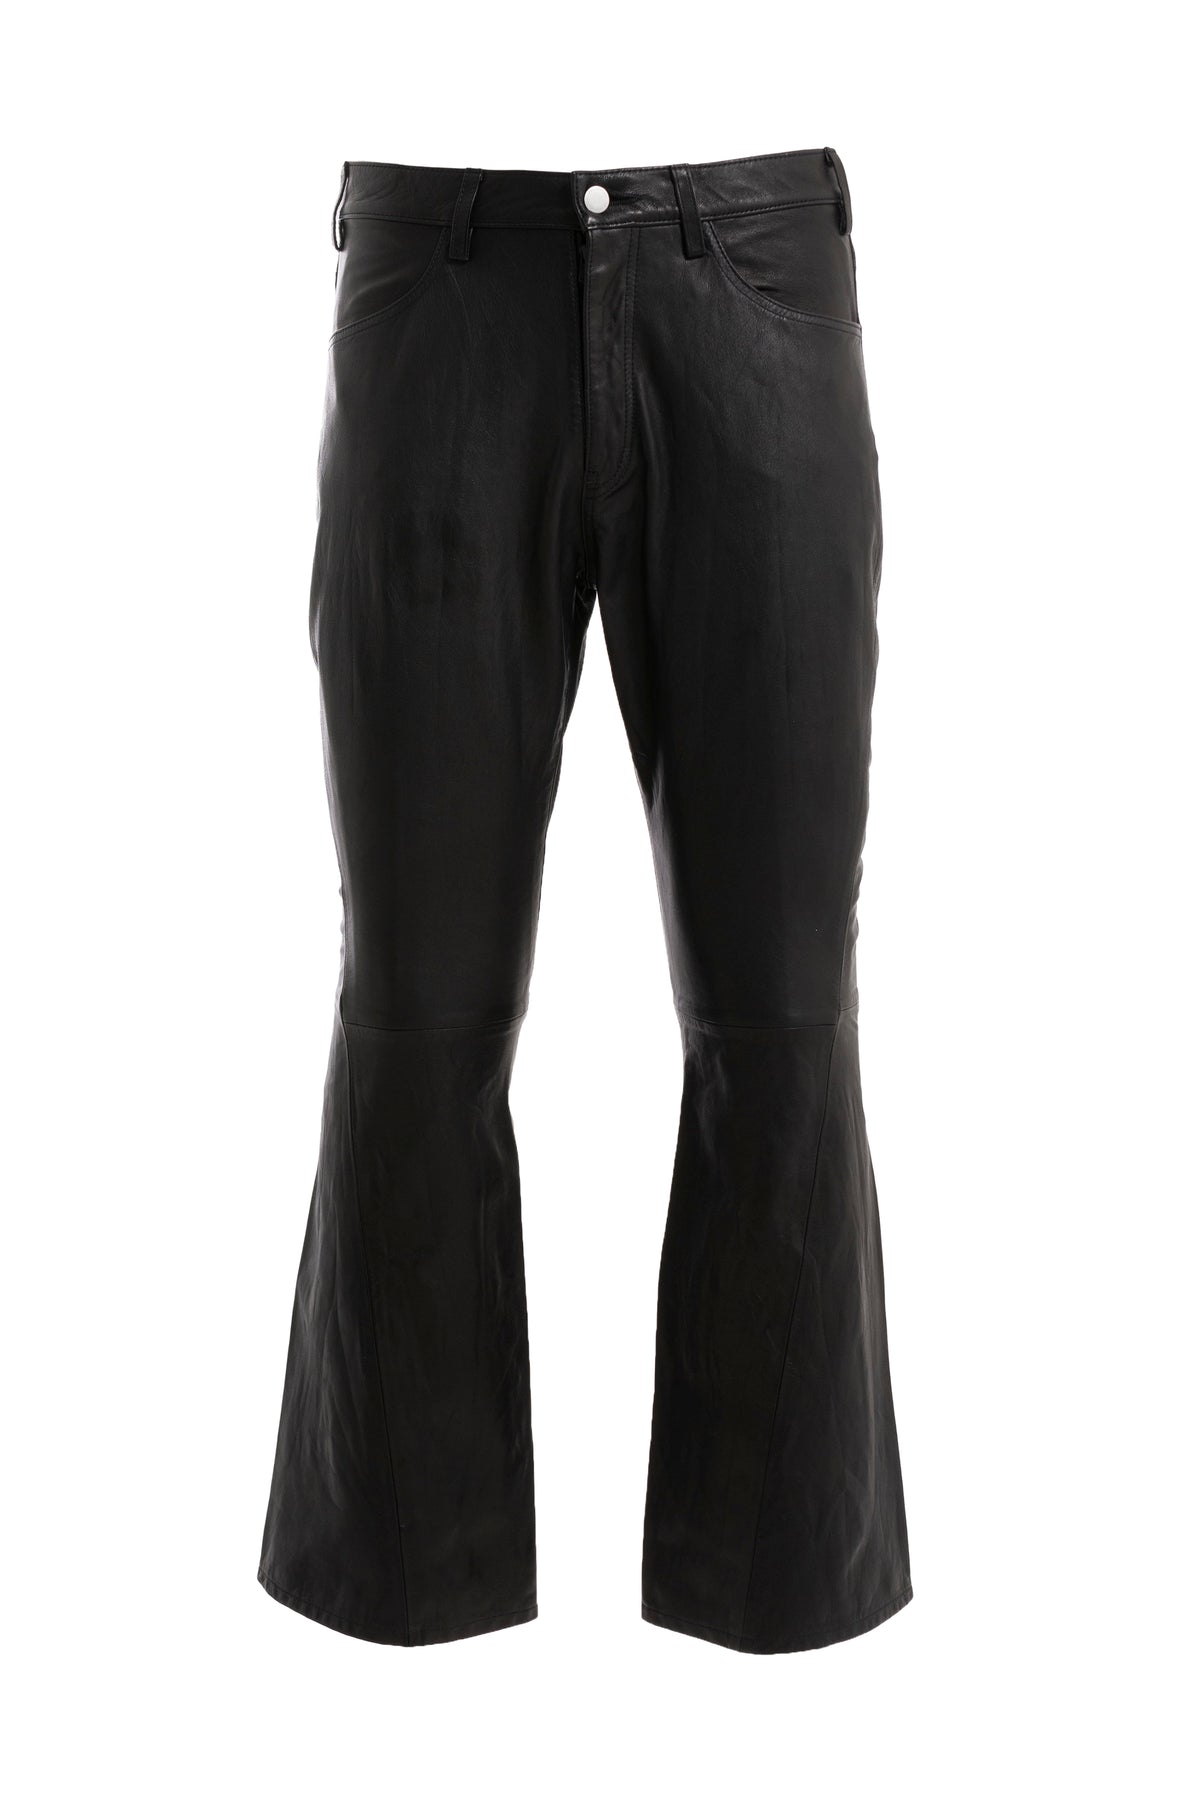 #146 LEATHER TROUSERS 2.0 / BLK